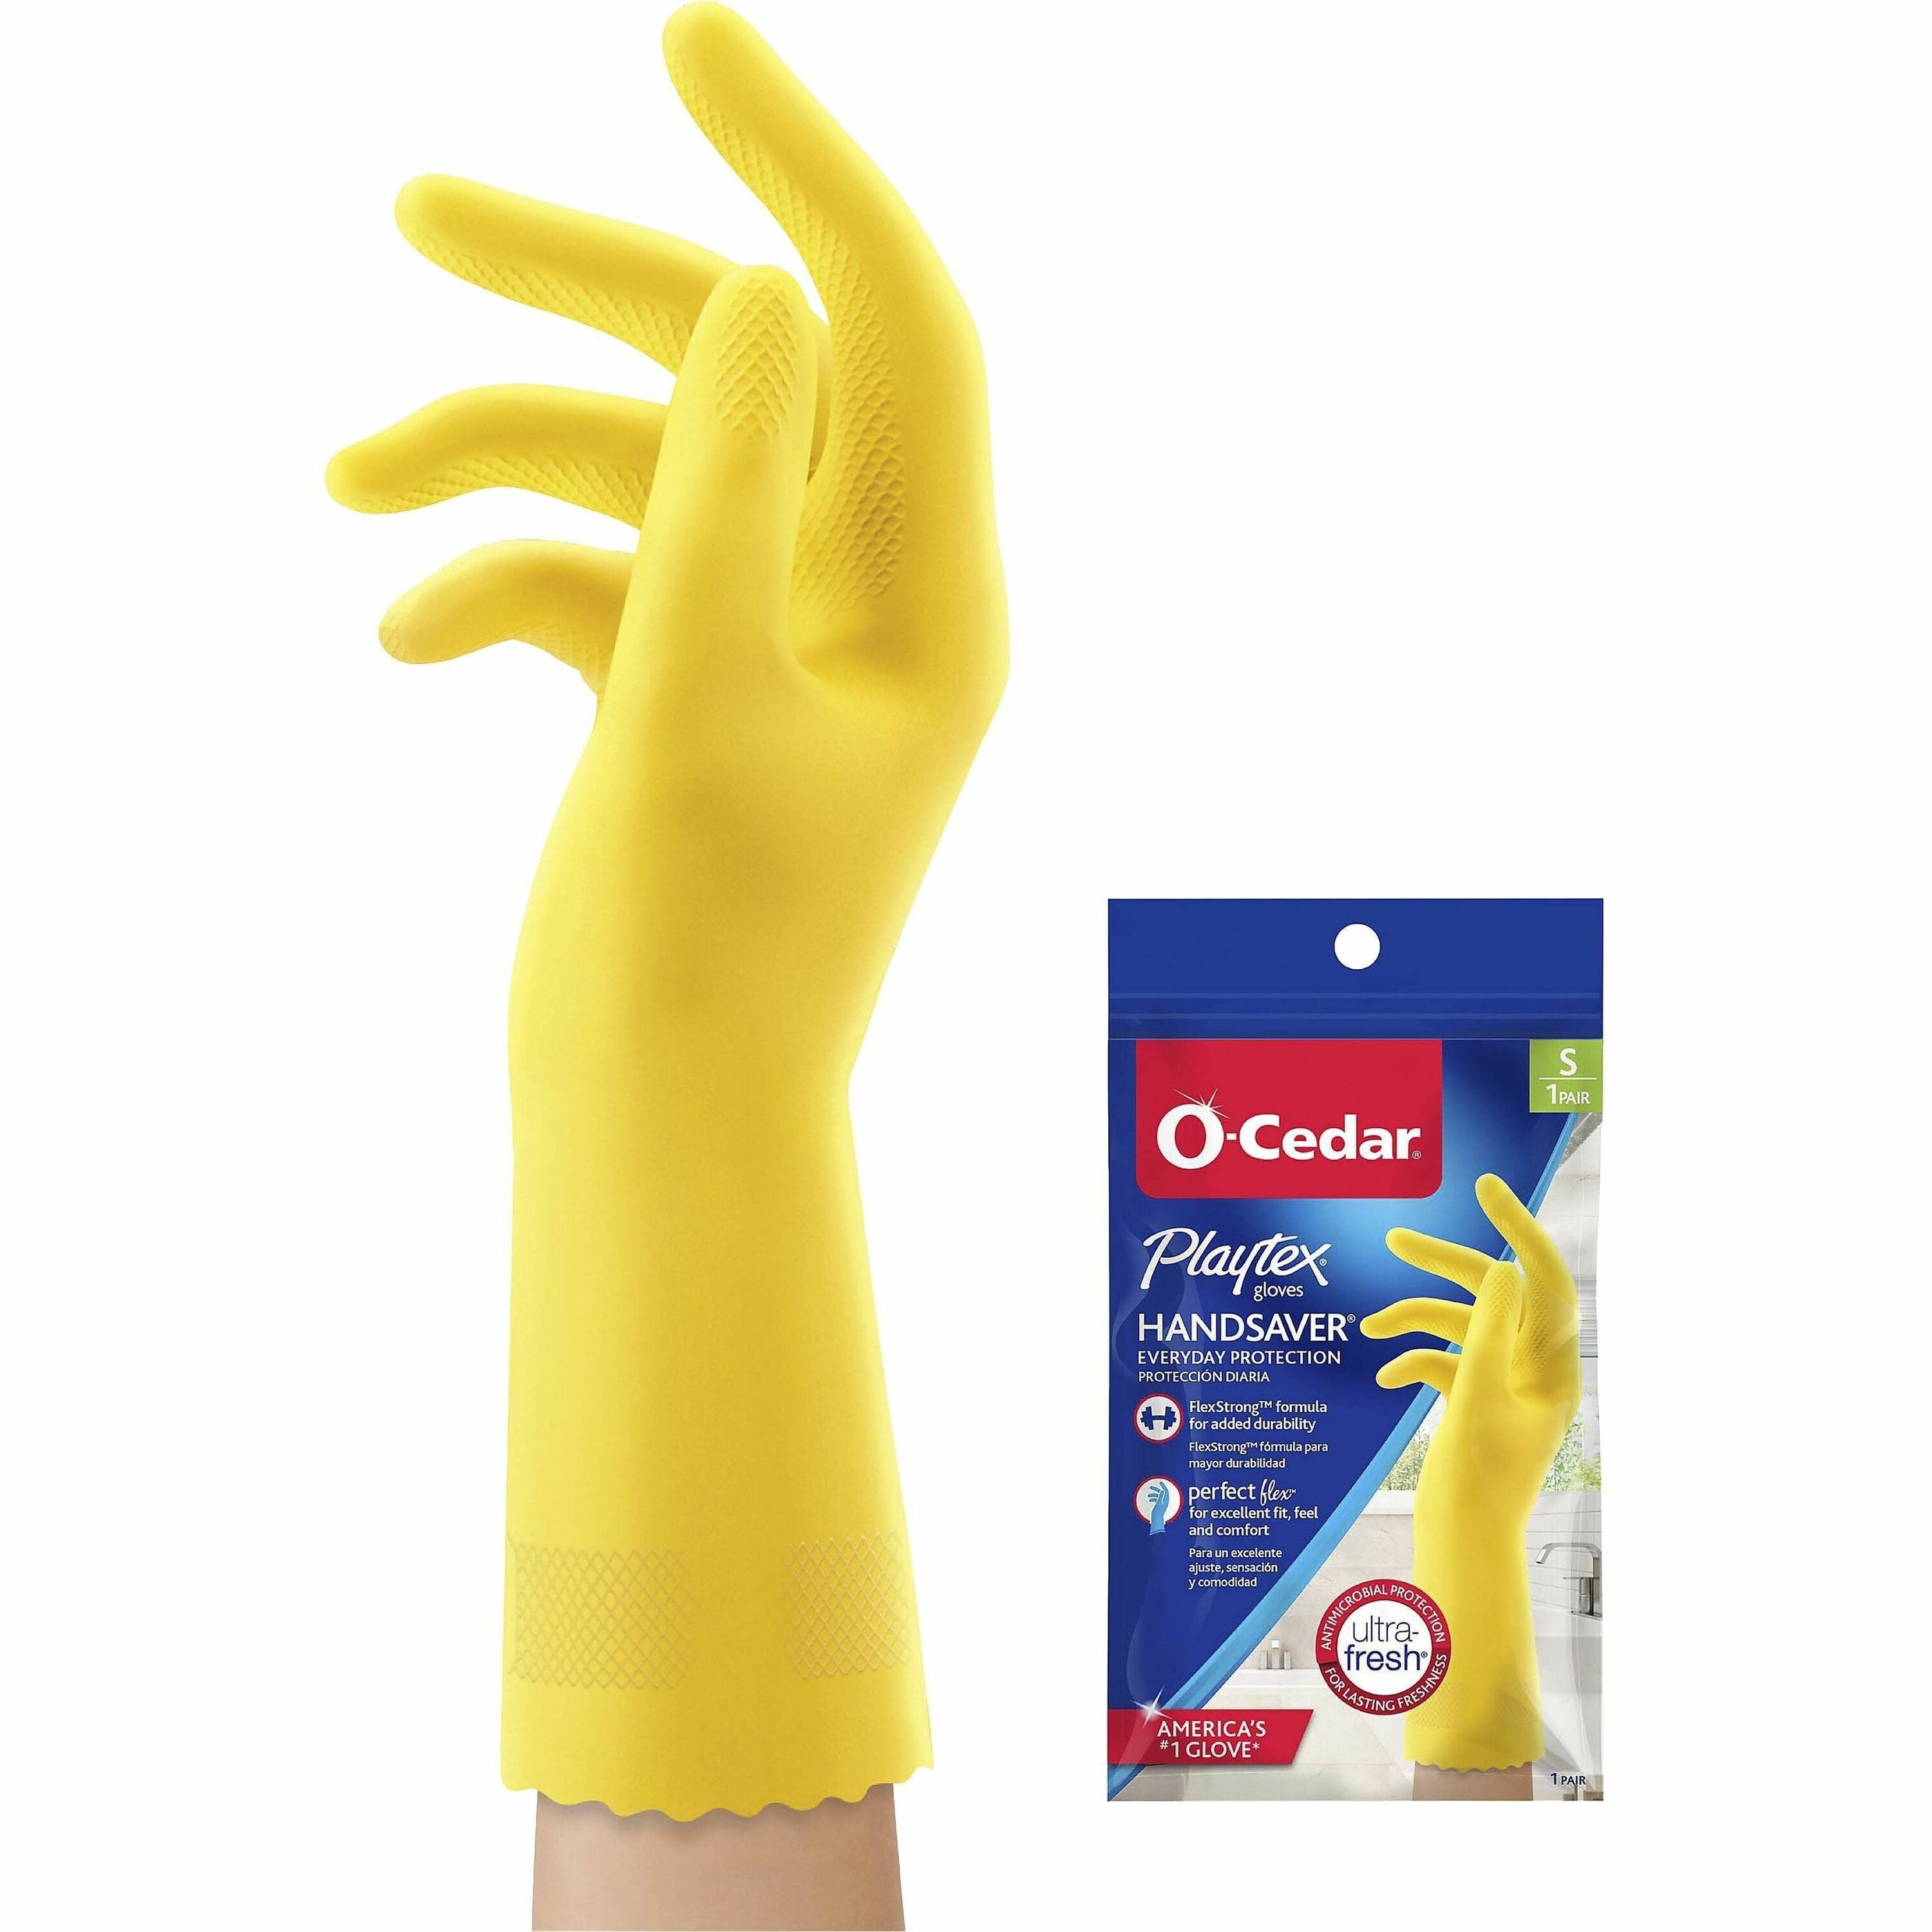 o-cedar-playtex-handsaver-gloves-hot-water-chemical-protection-small-size-latex-nitrile-neoprene-yellow-long-lasting-durable-anti-microbial-odor-resistant-comfortable-textured-fingertip-textured-palm-reusable-for-household-2-_fhp163677 - 1